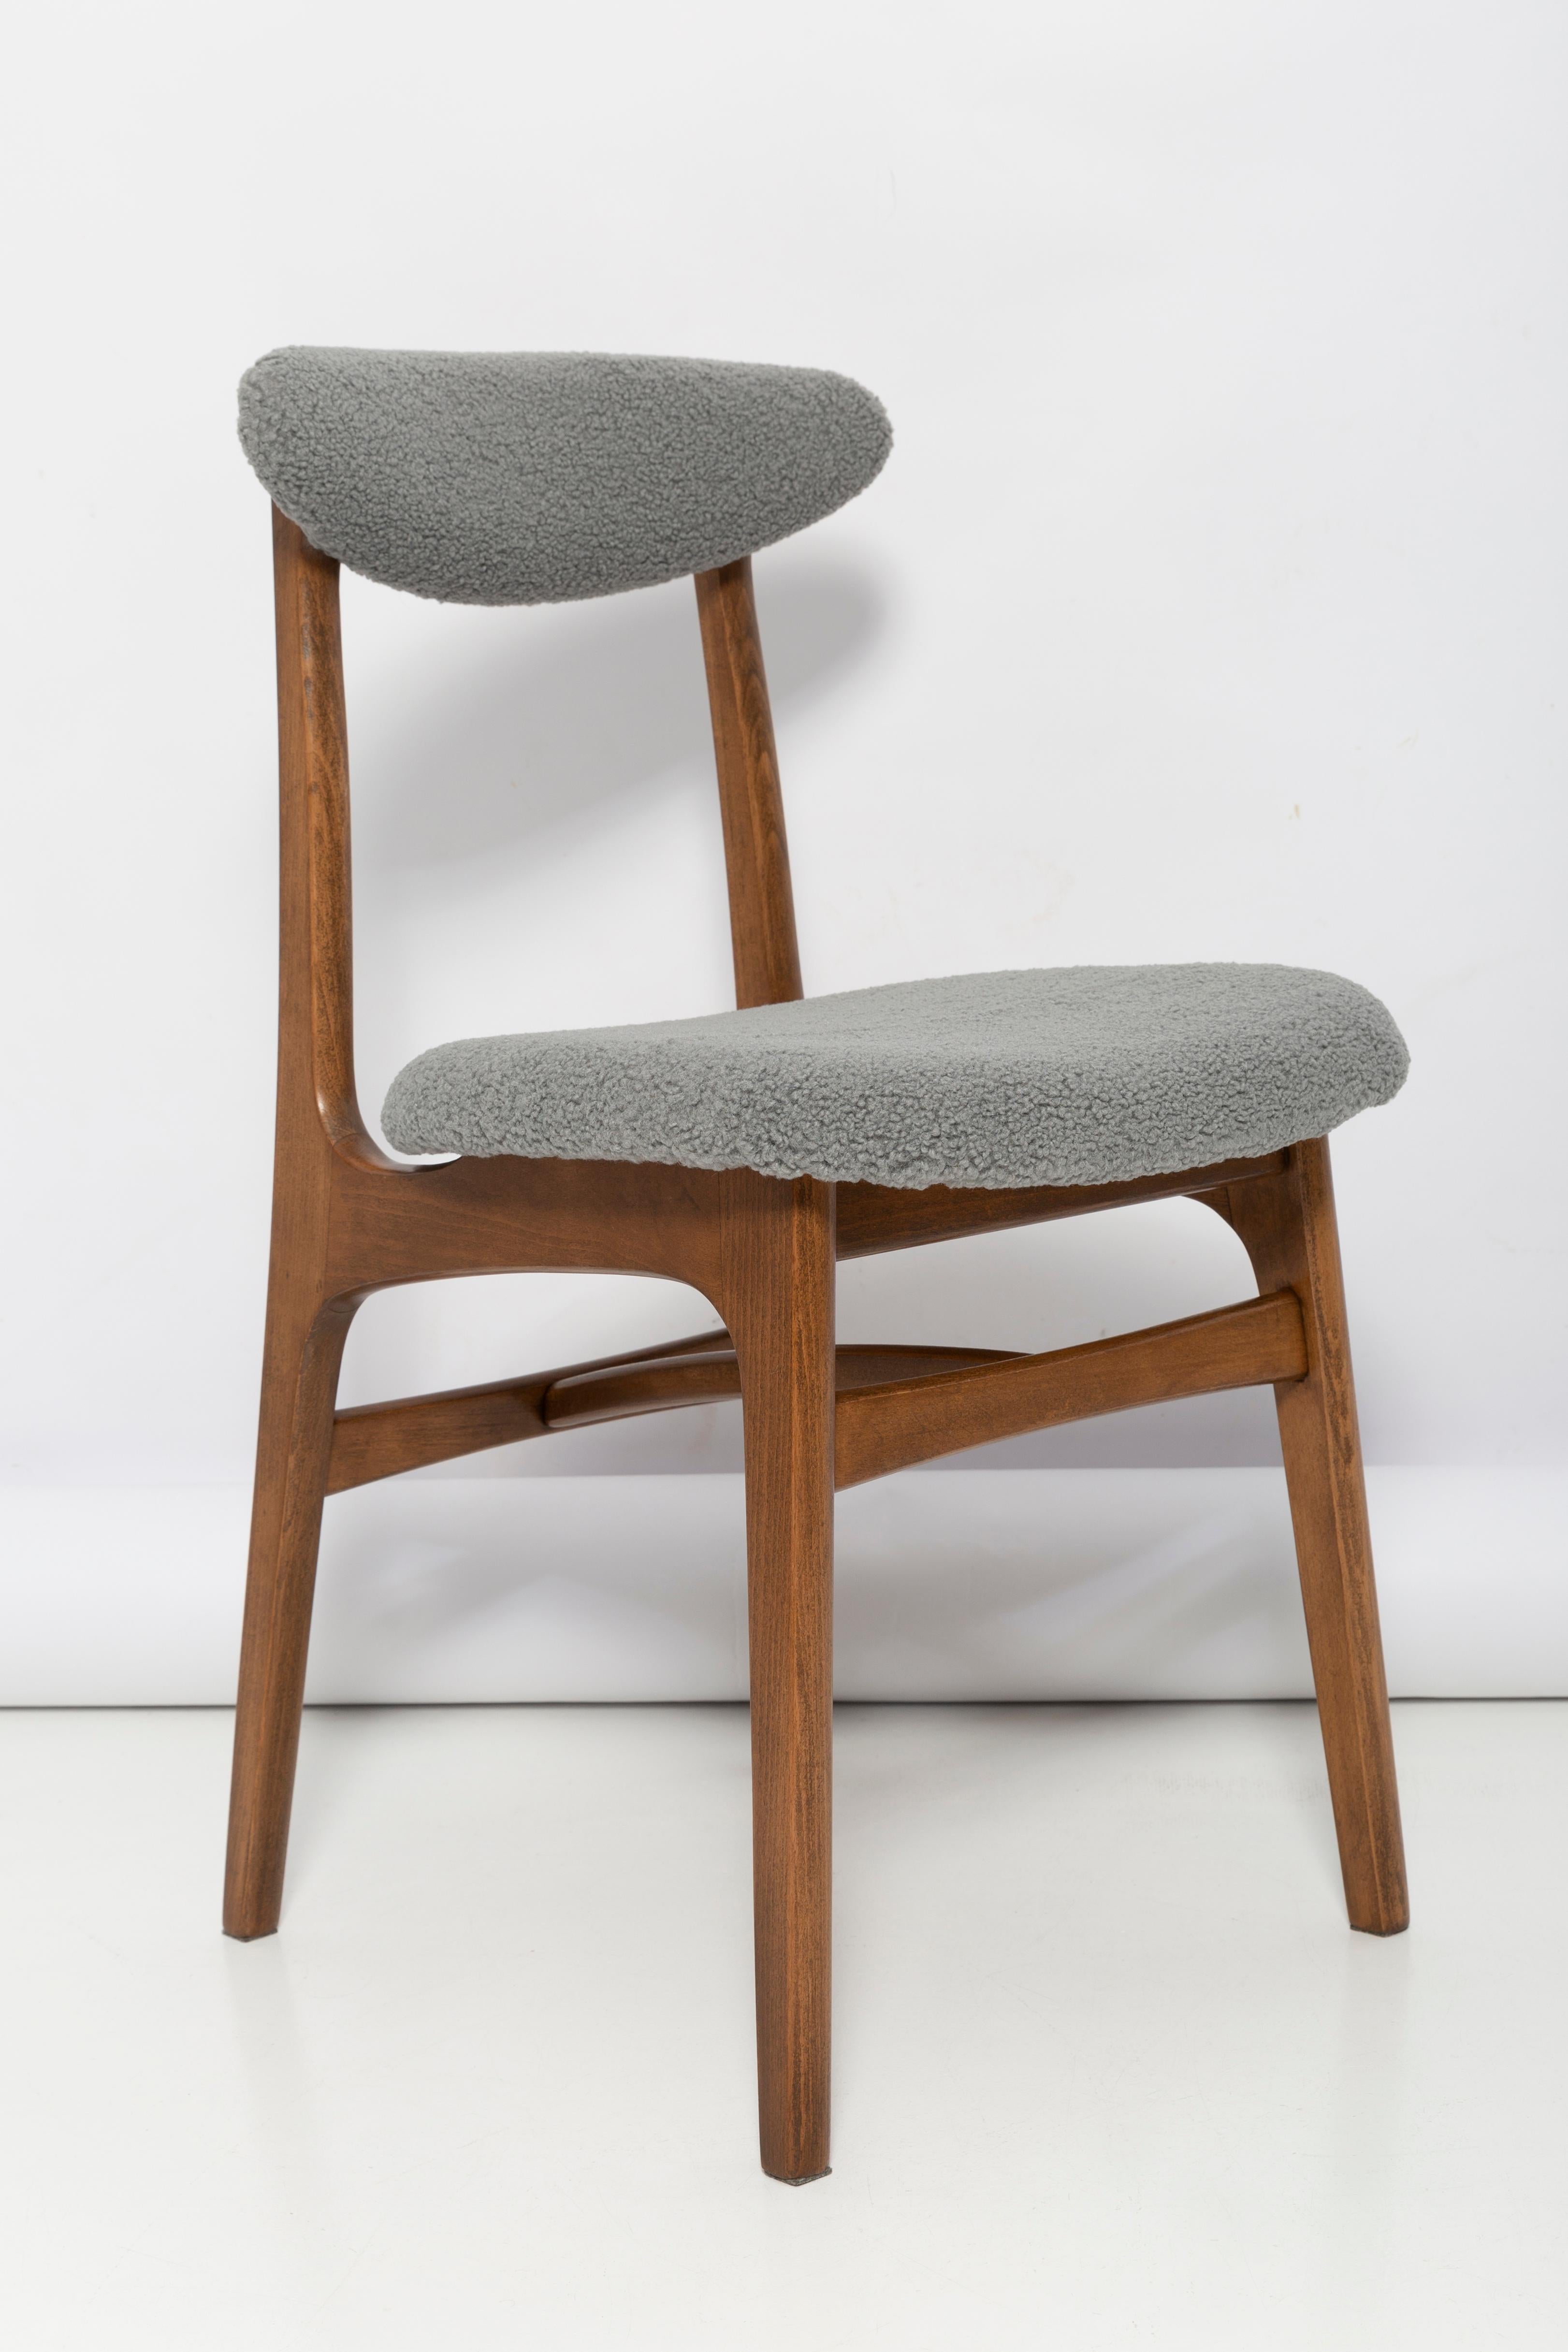 Light form nice vintage chairs designed by Prof. Rajmund Halas. It has been made of beechwood. Designed and produced in Poland. Chairs are after undergone a complete upholstery renovation, the woodwork has been refreshed. Seats and backs were